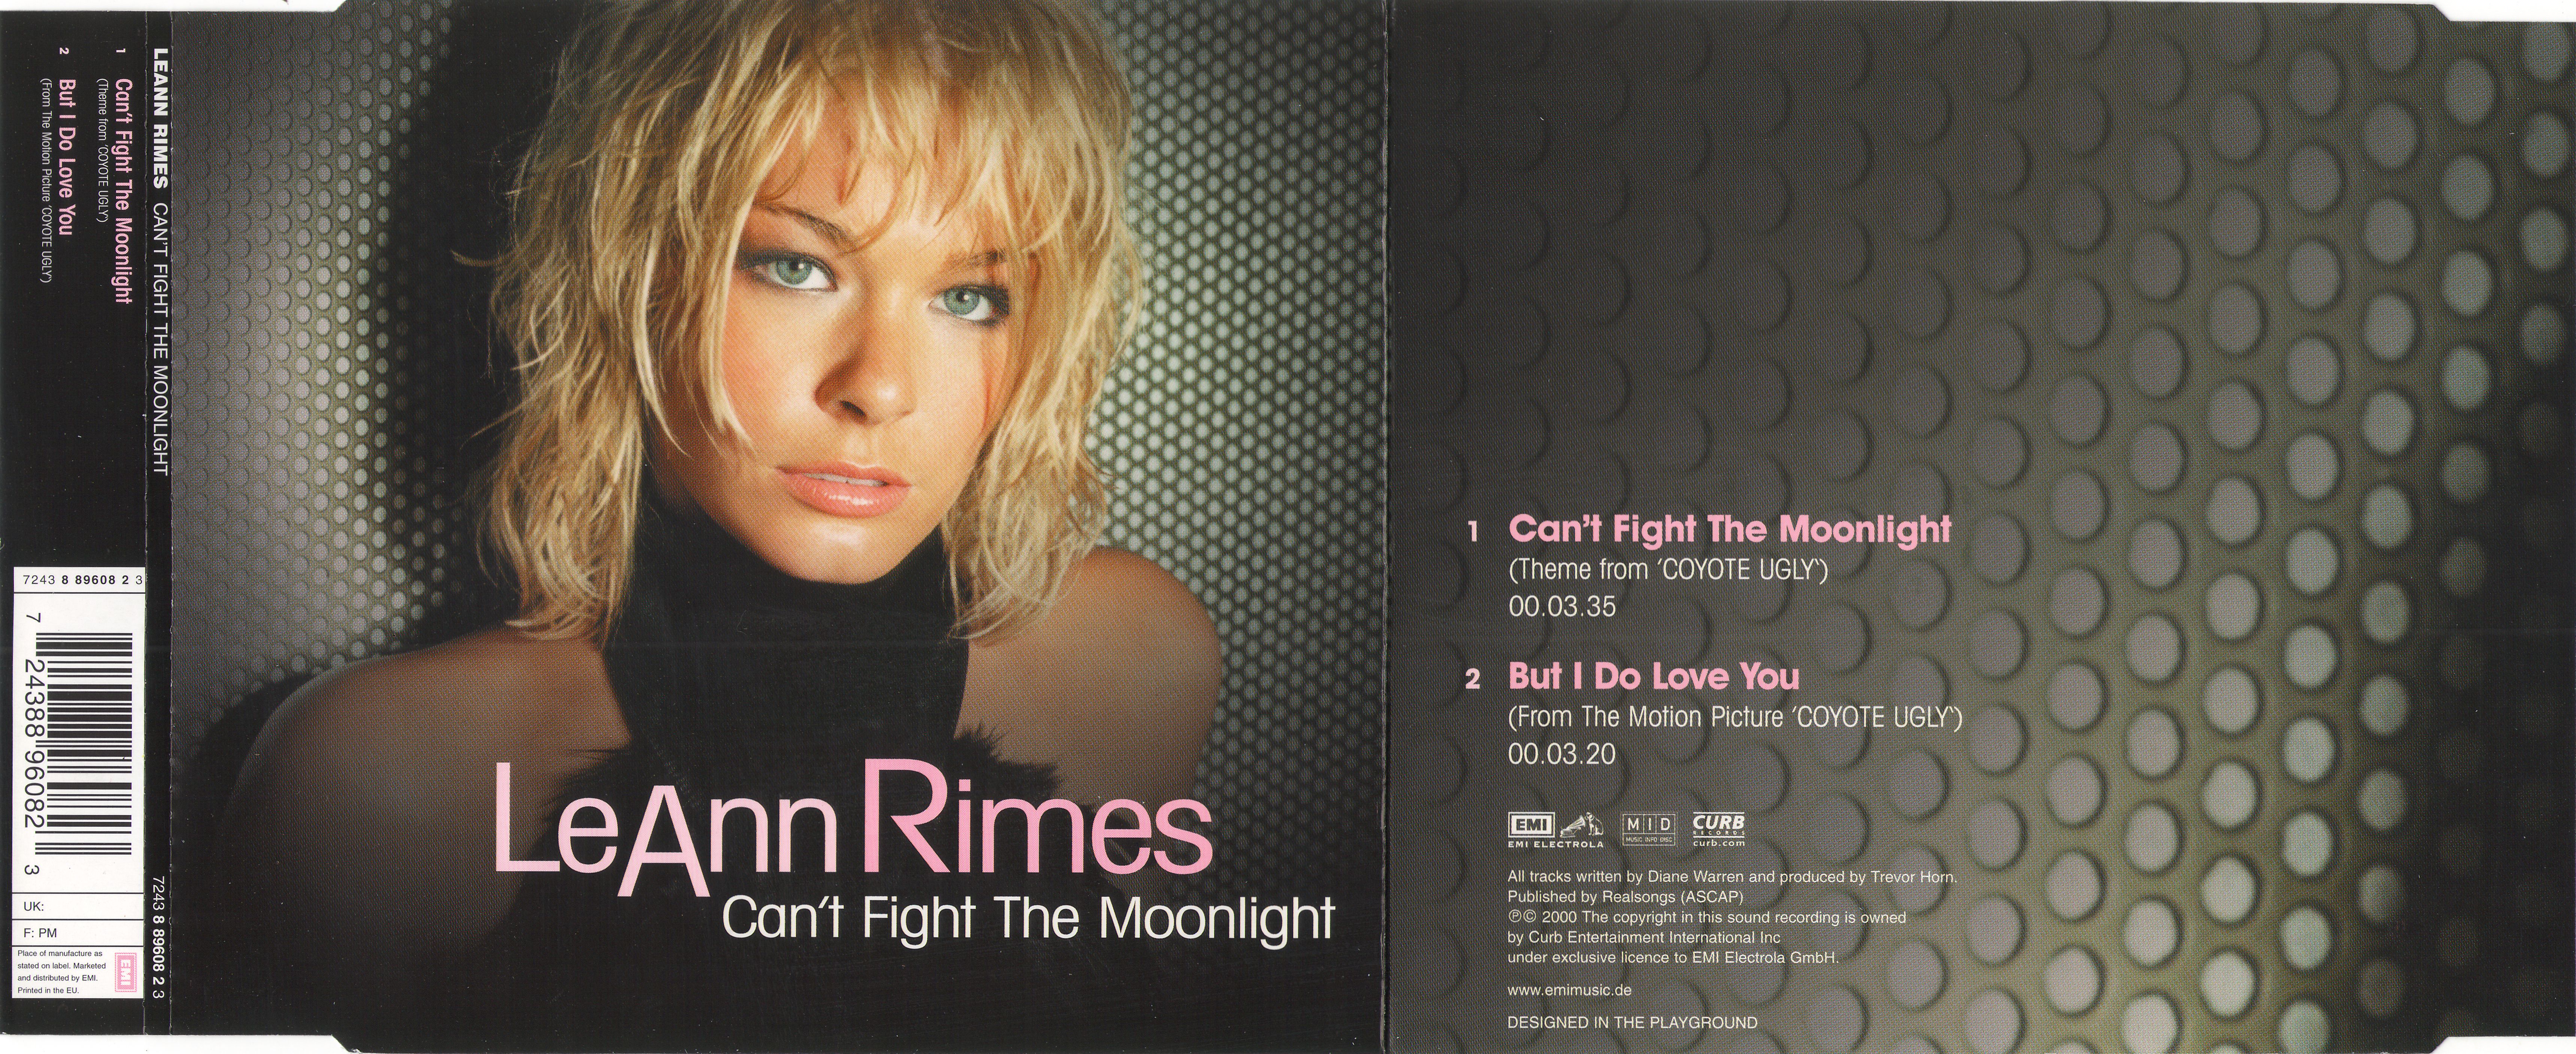 Art for Can't Fight The Moonlight by Leann Rimes